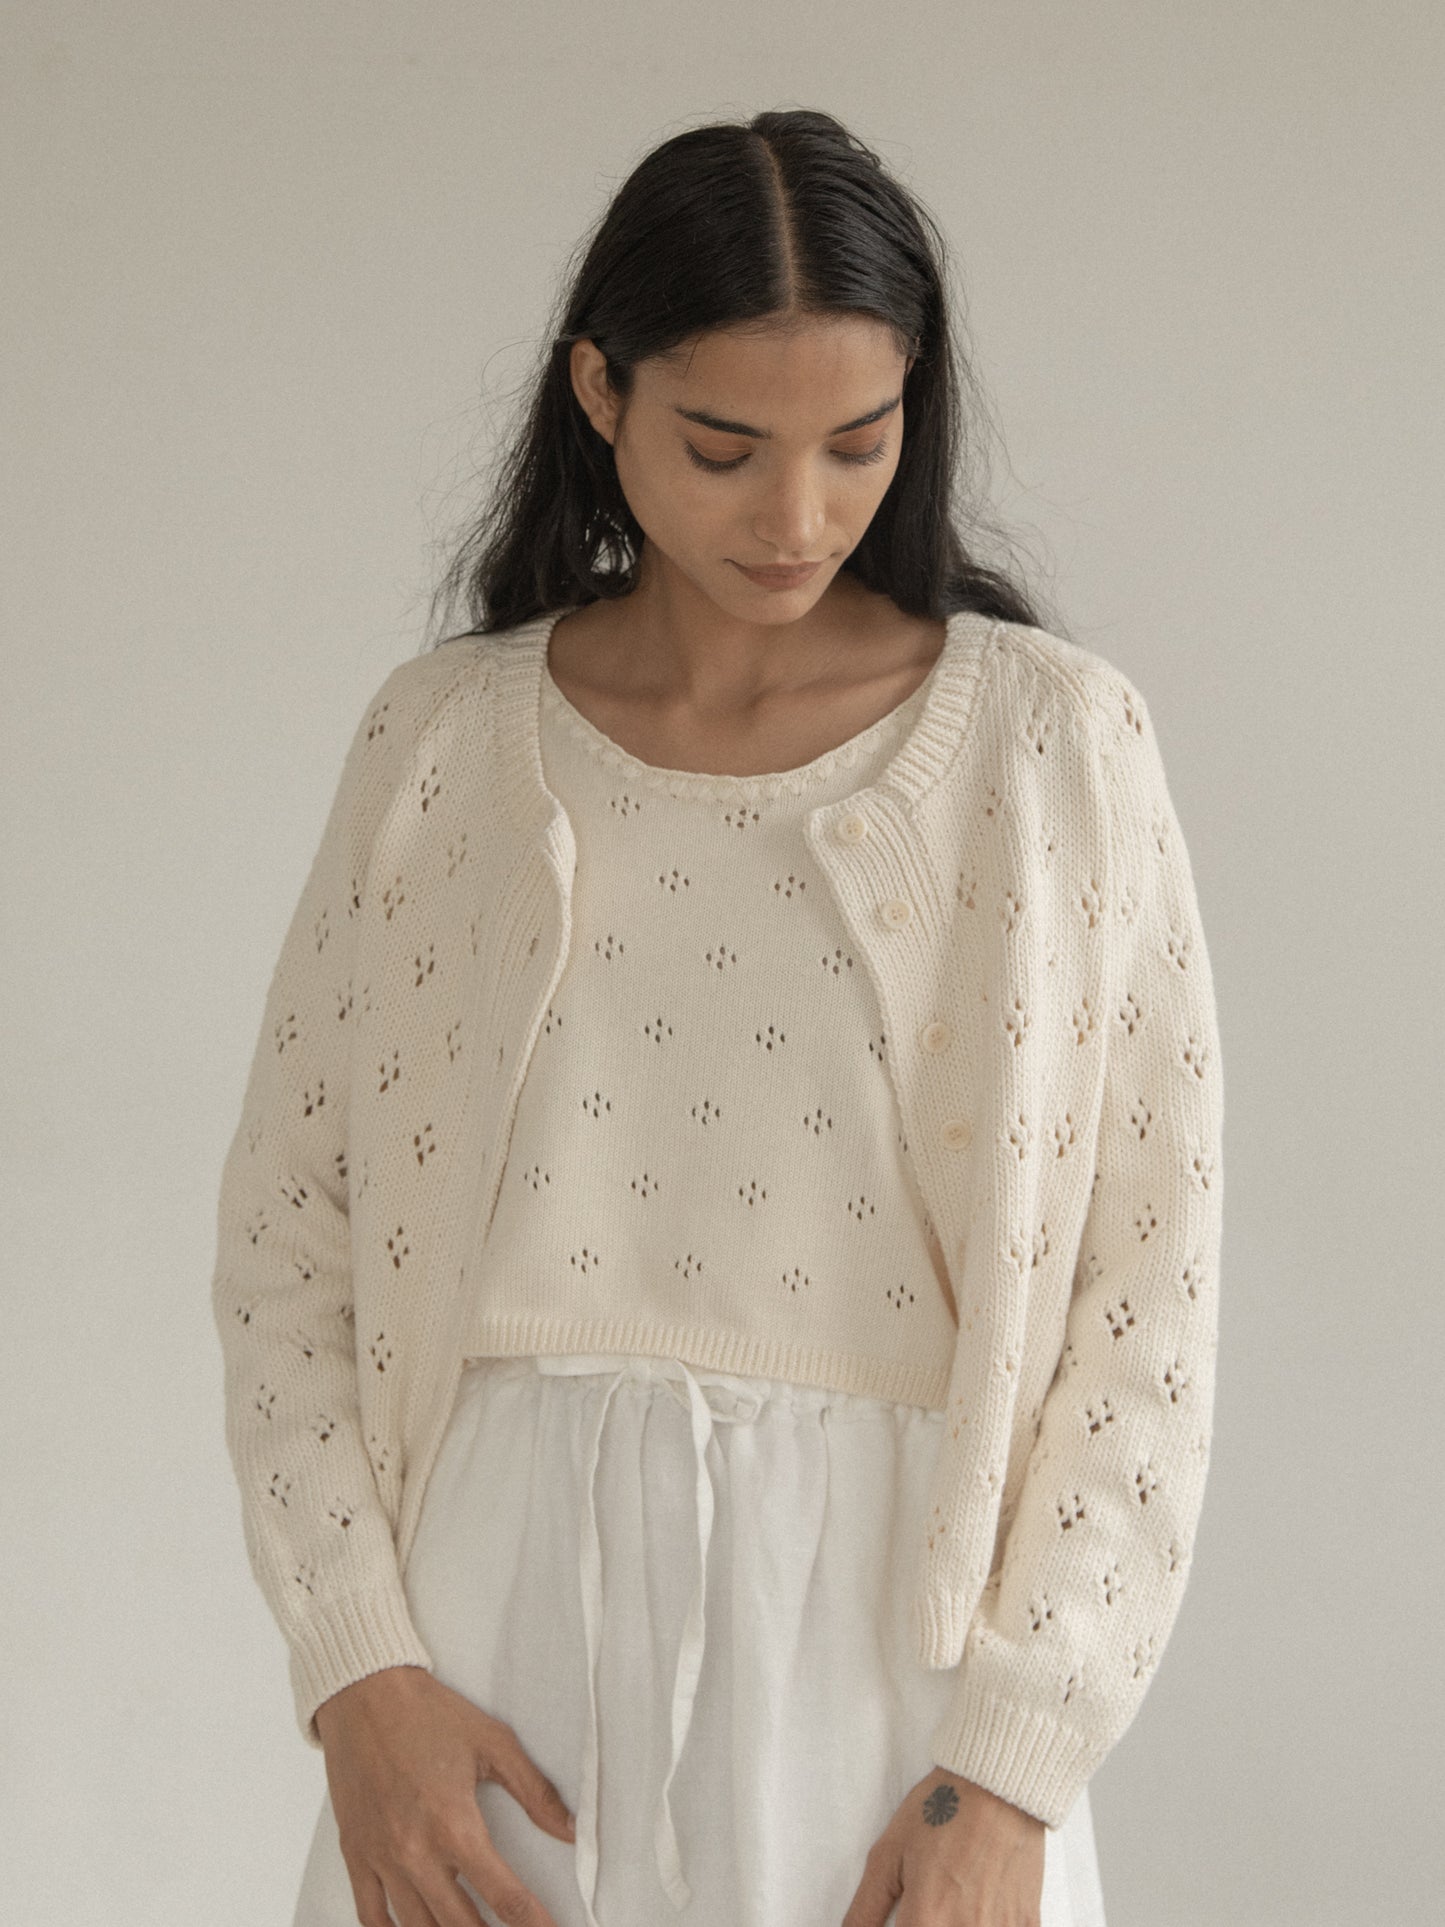 Mabel Cardigan in Ivory